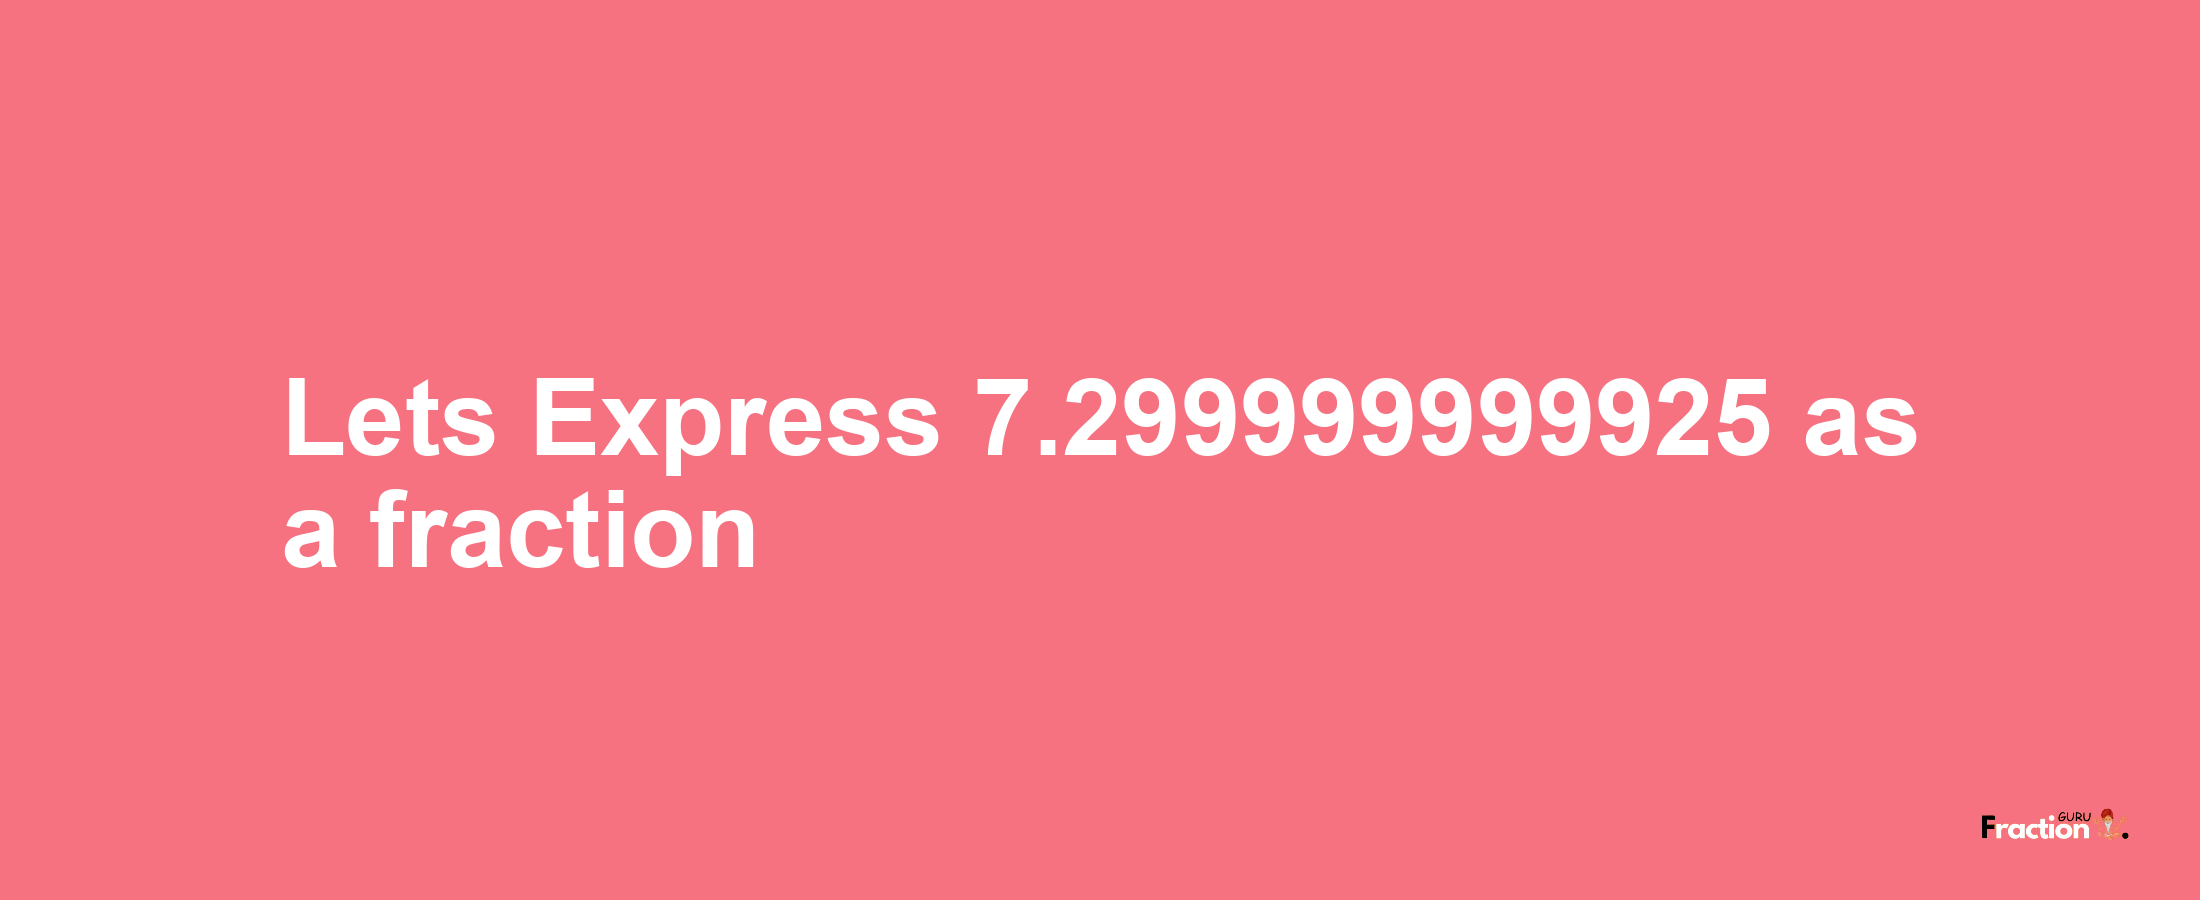 Lets Express 7.299999999925 as afraction